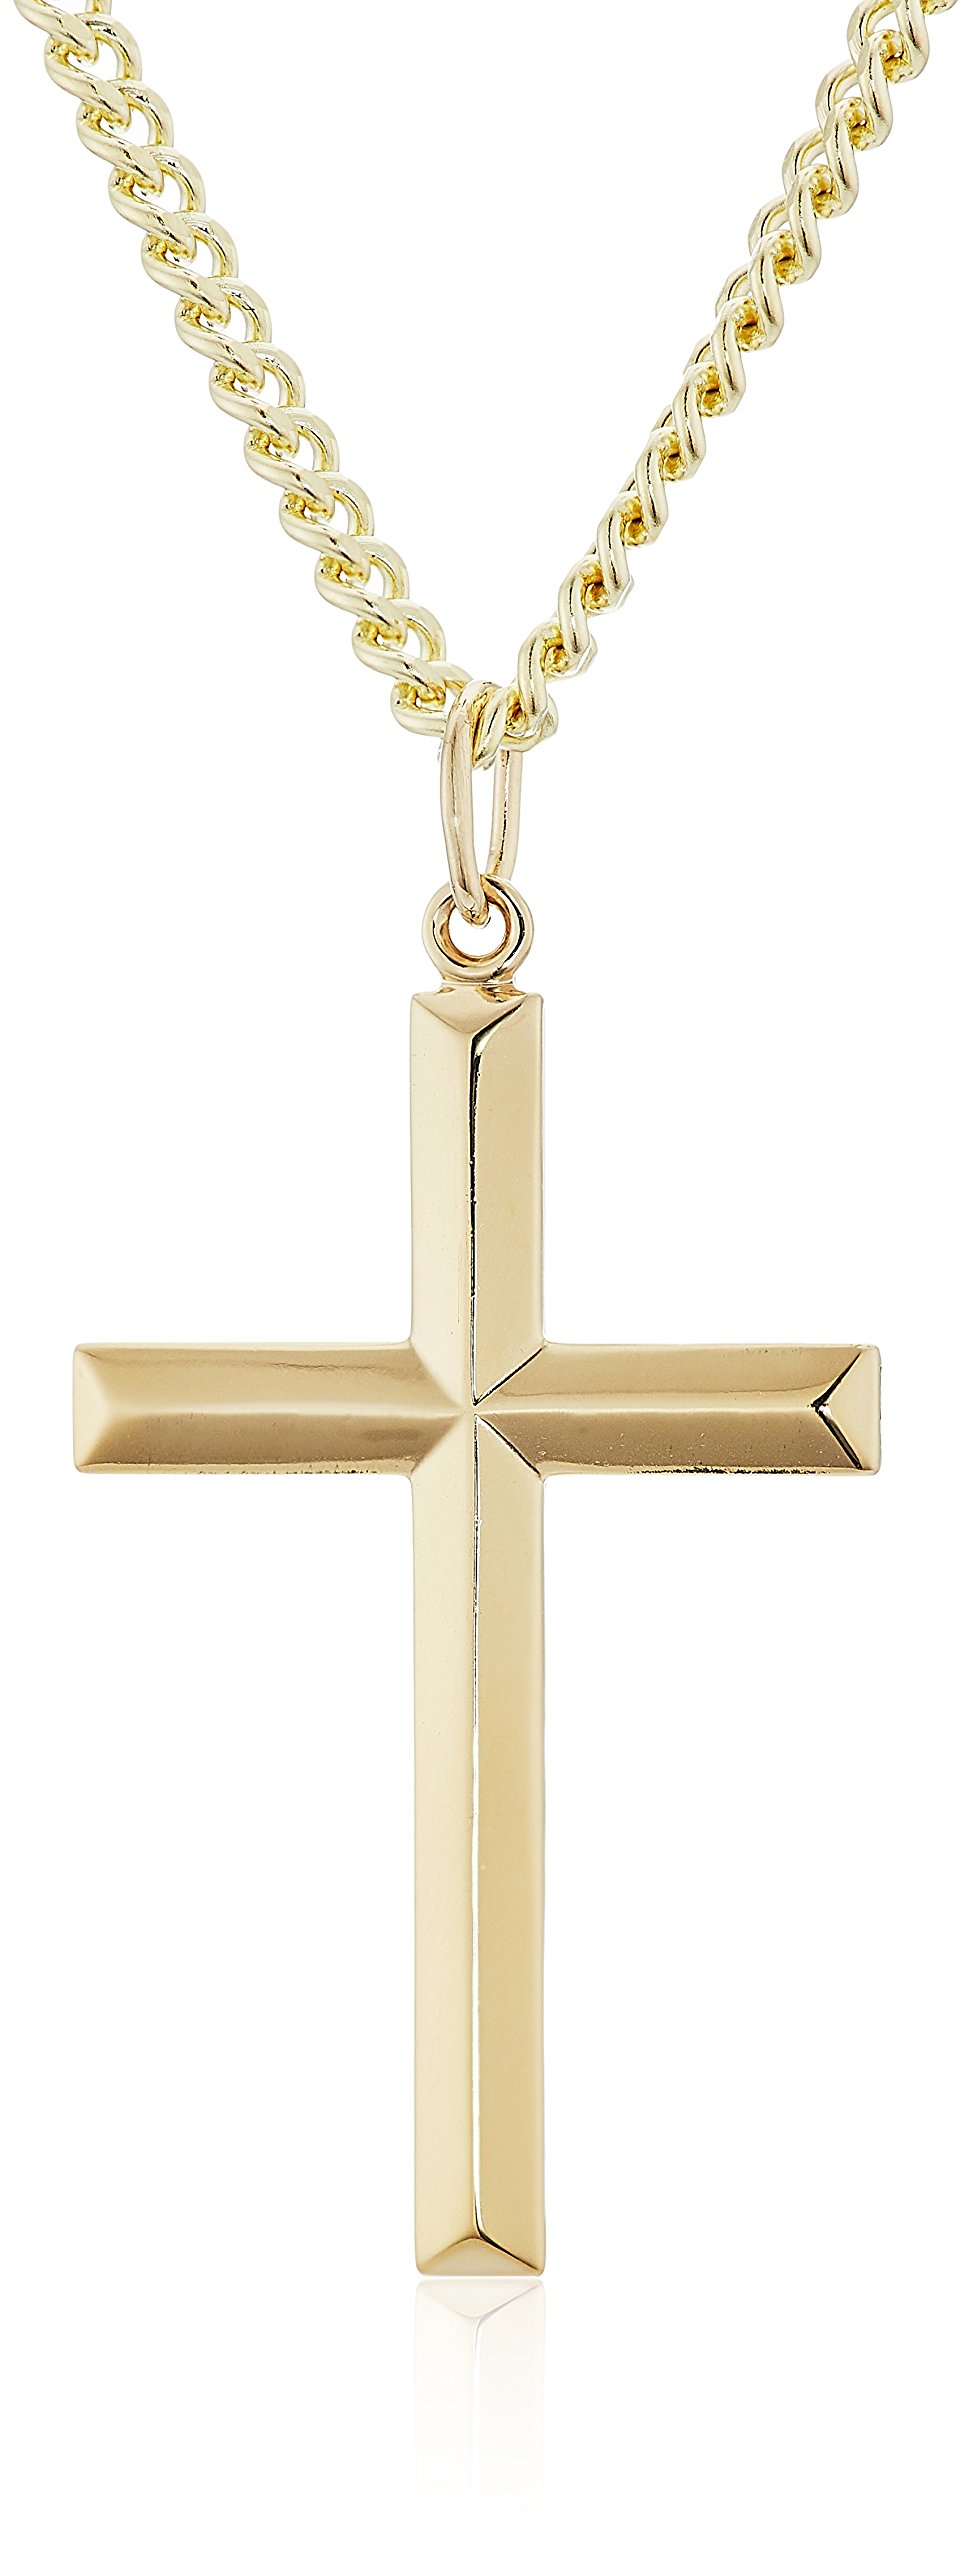 Men's 14k Gold Filled Solid Beveled Edge Embossed Cross with Gold Plated Stainless Steel Chain Pendant Necklace, 24